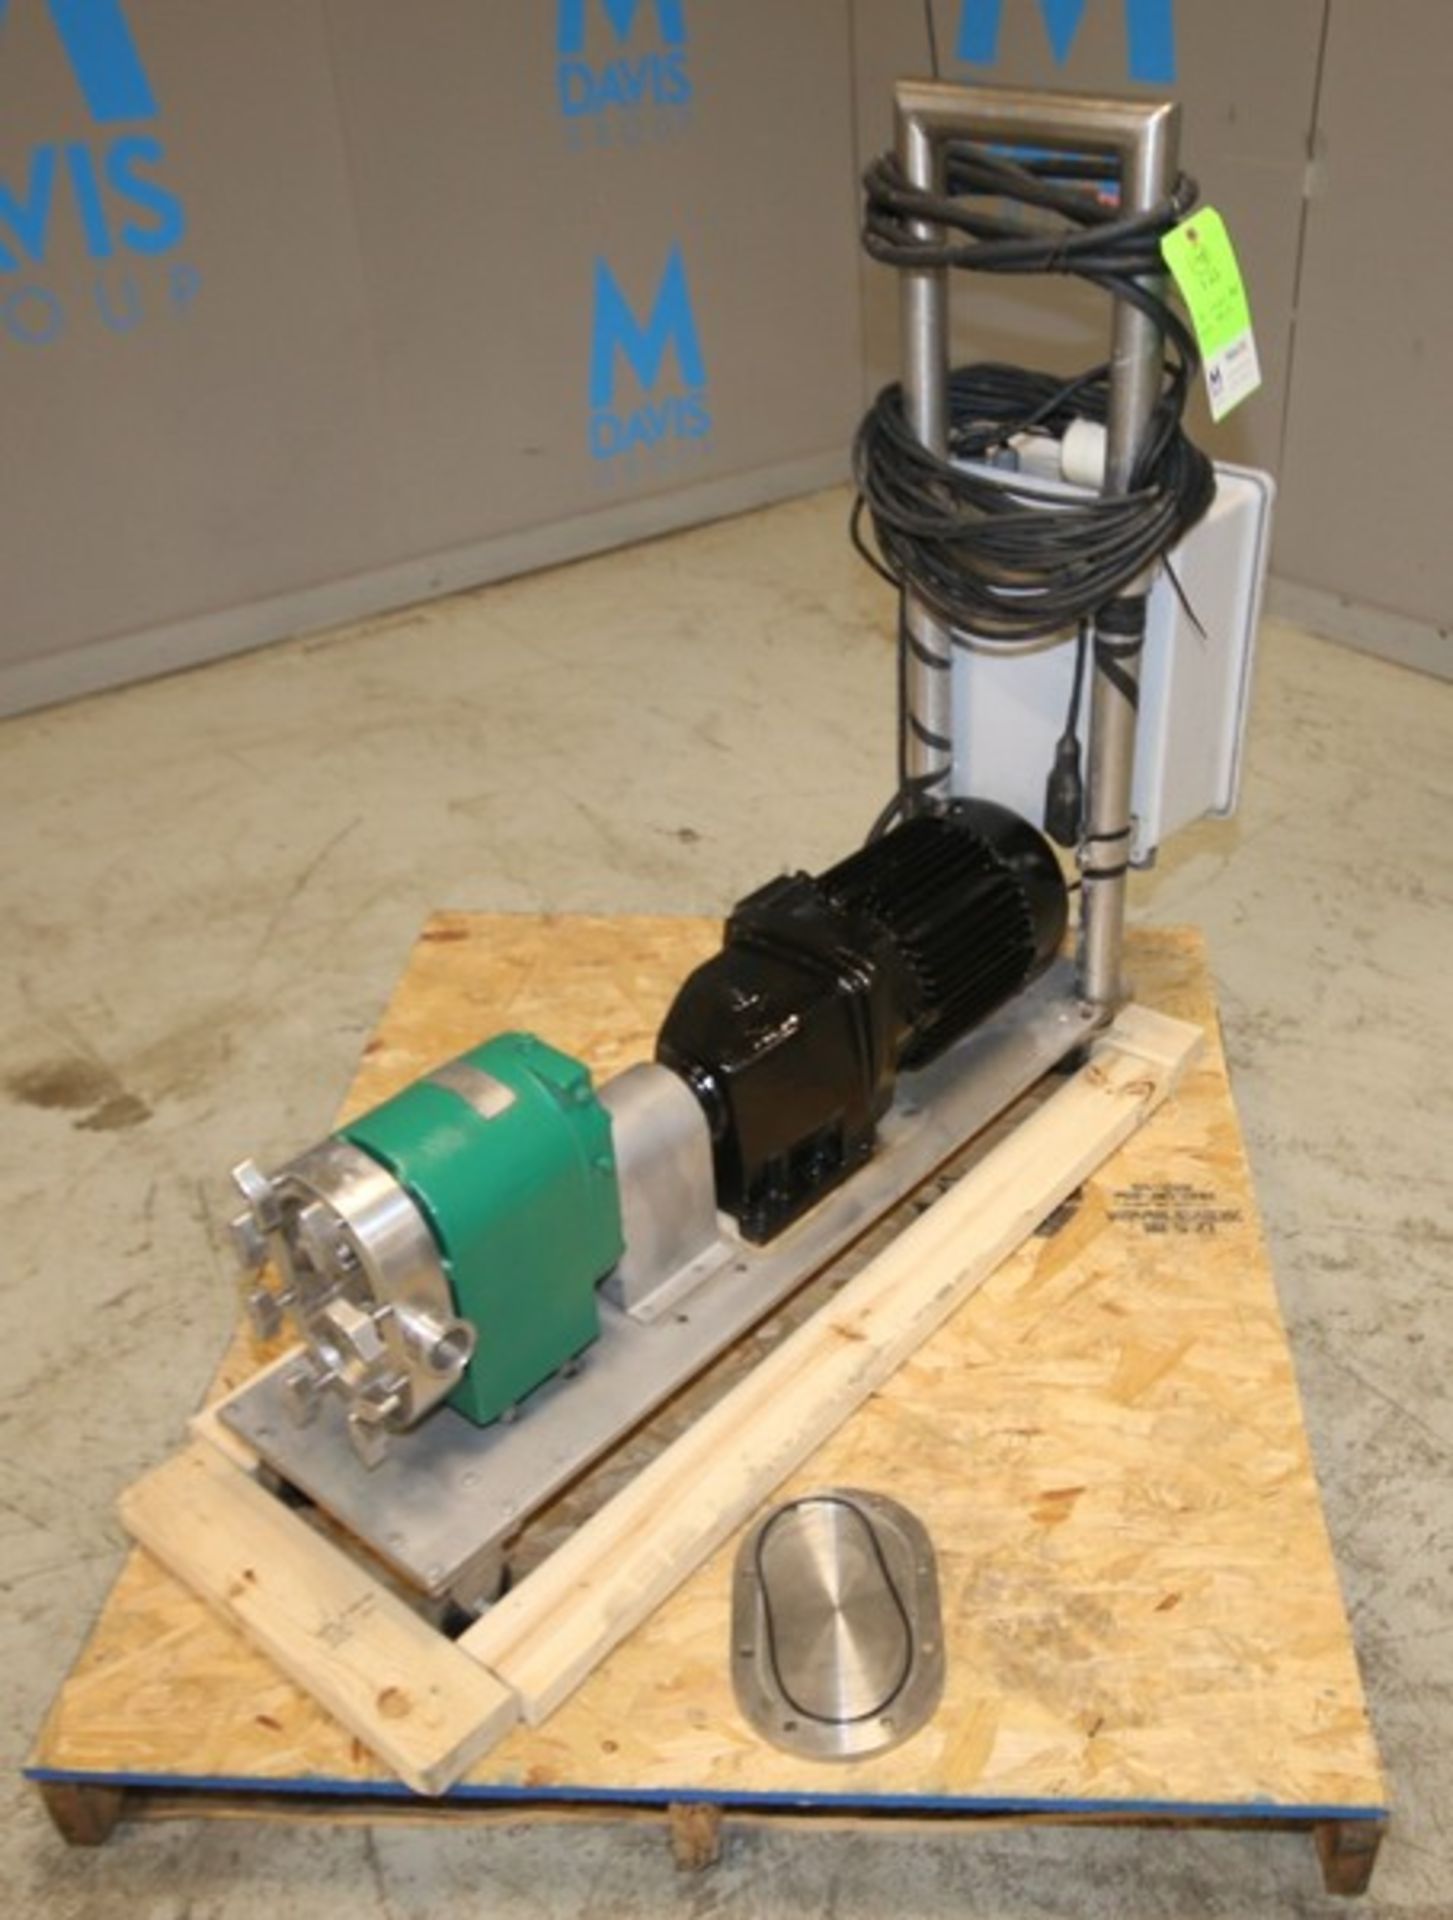 Tri Clover Positive Displacement Pump, Model PR25-1 1/2 - MUC4-SL-S, SN Y1534, with 1 1/2" CT S/S